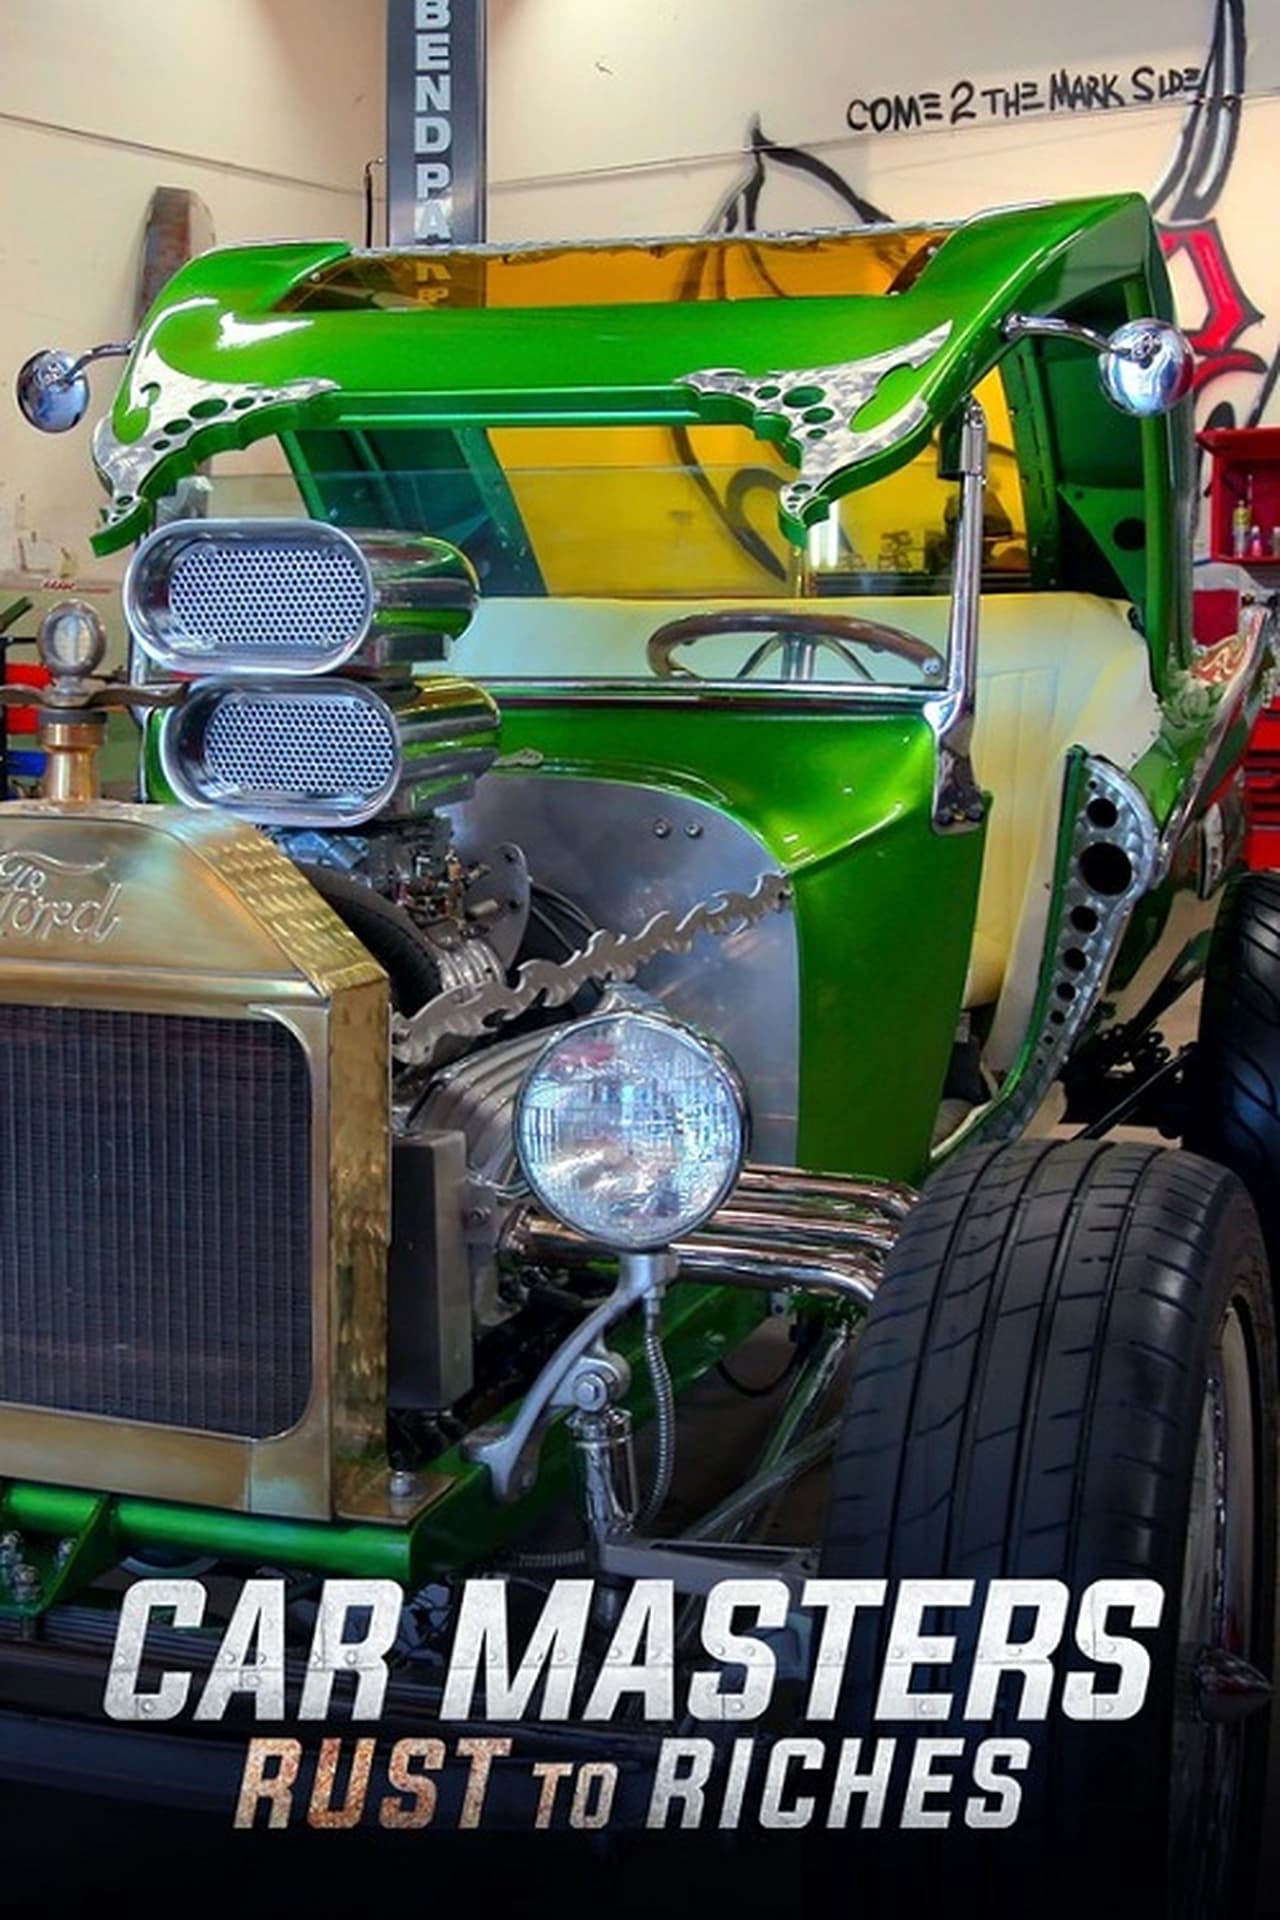 Car Masters: Rust to Riches (2021) S3 EP01&EP08 640Kbps 23.976Fps 48Khz 5.1Ch DD+ NF E-AC3 Turkish Audio TAC